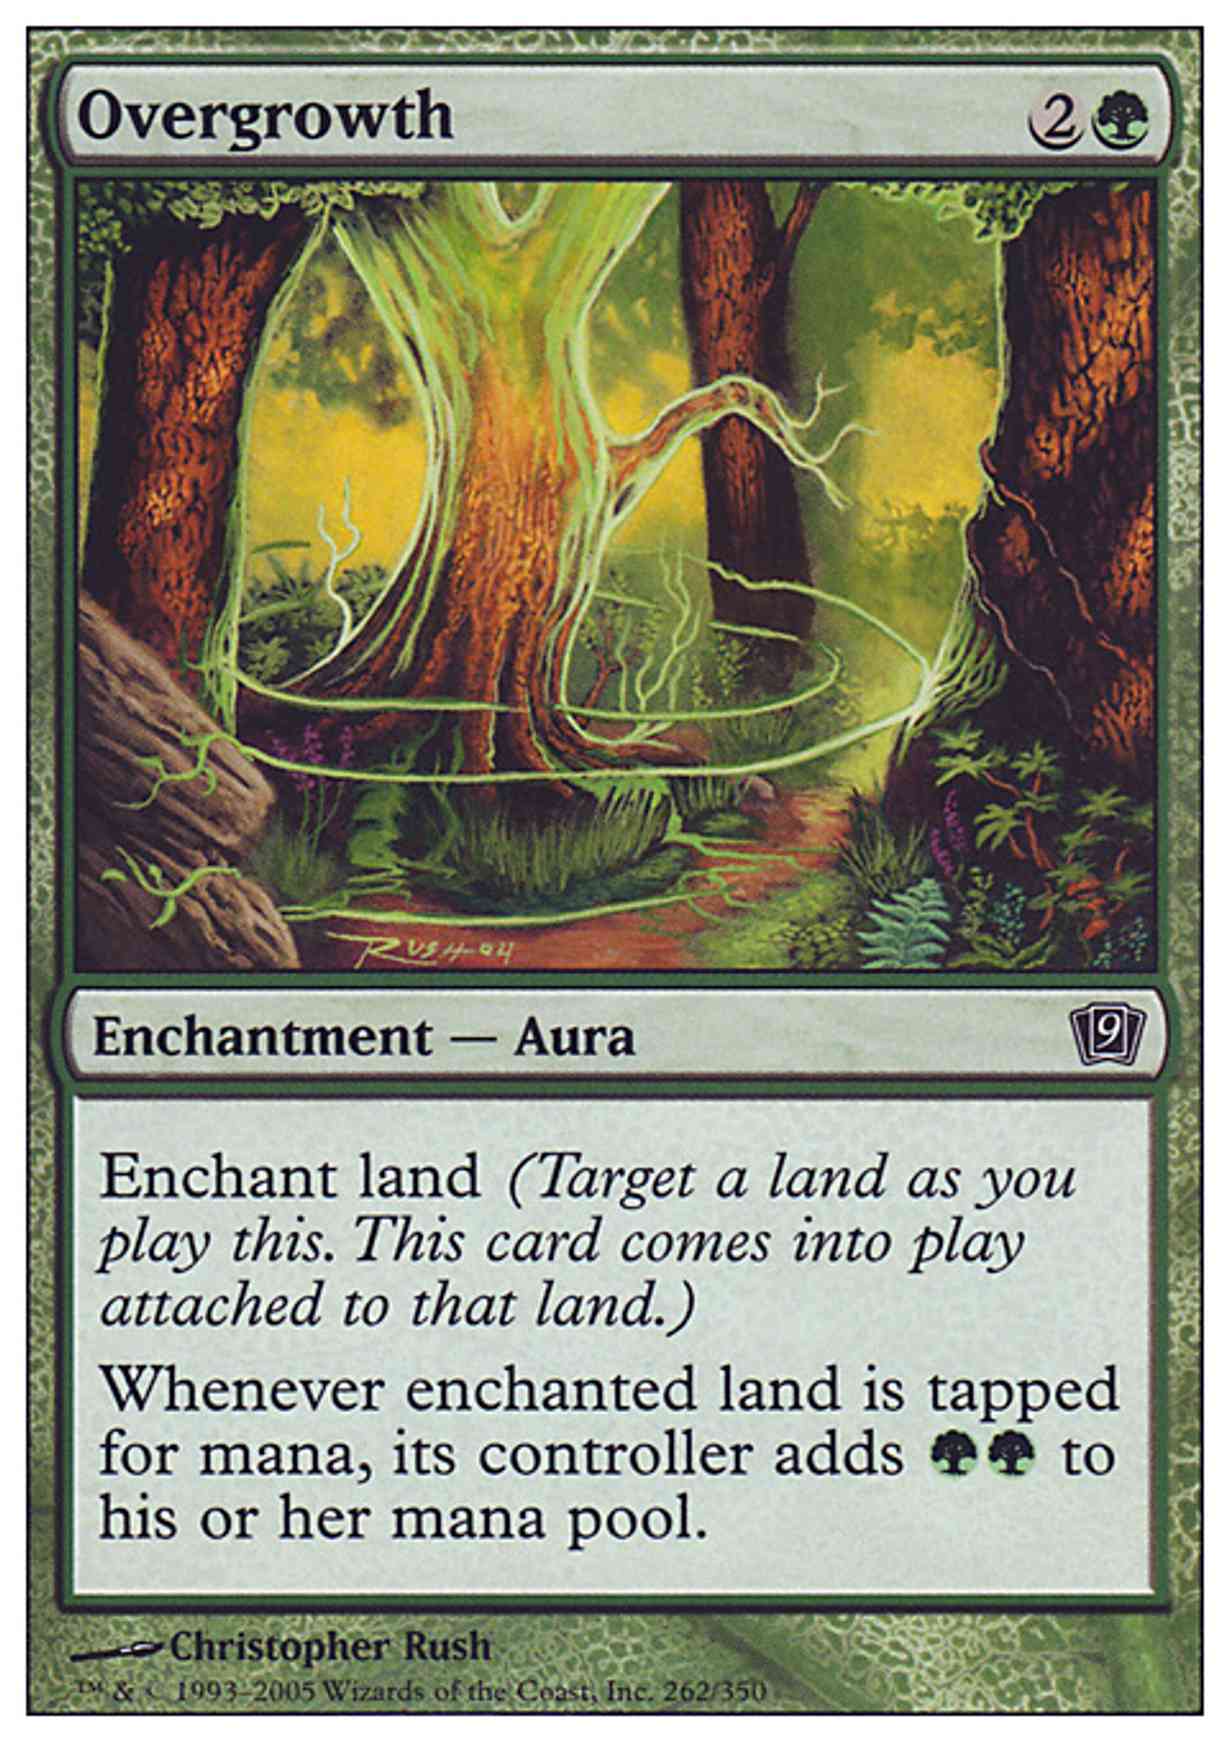 Overgrowth magic card front